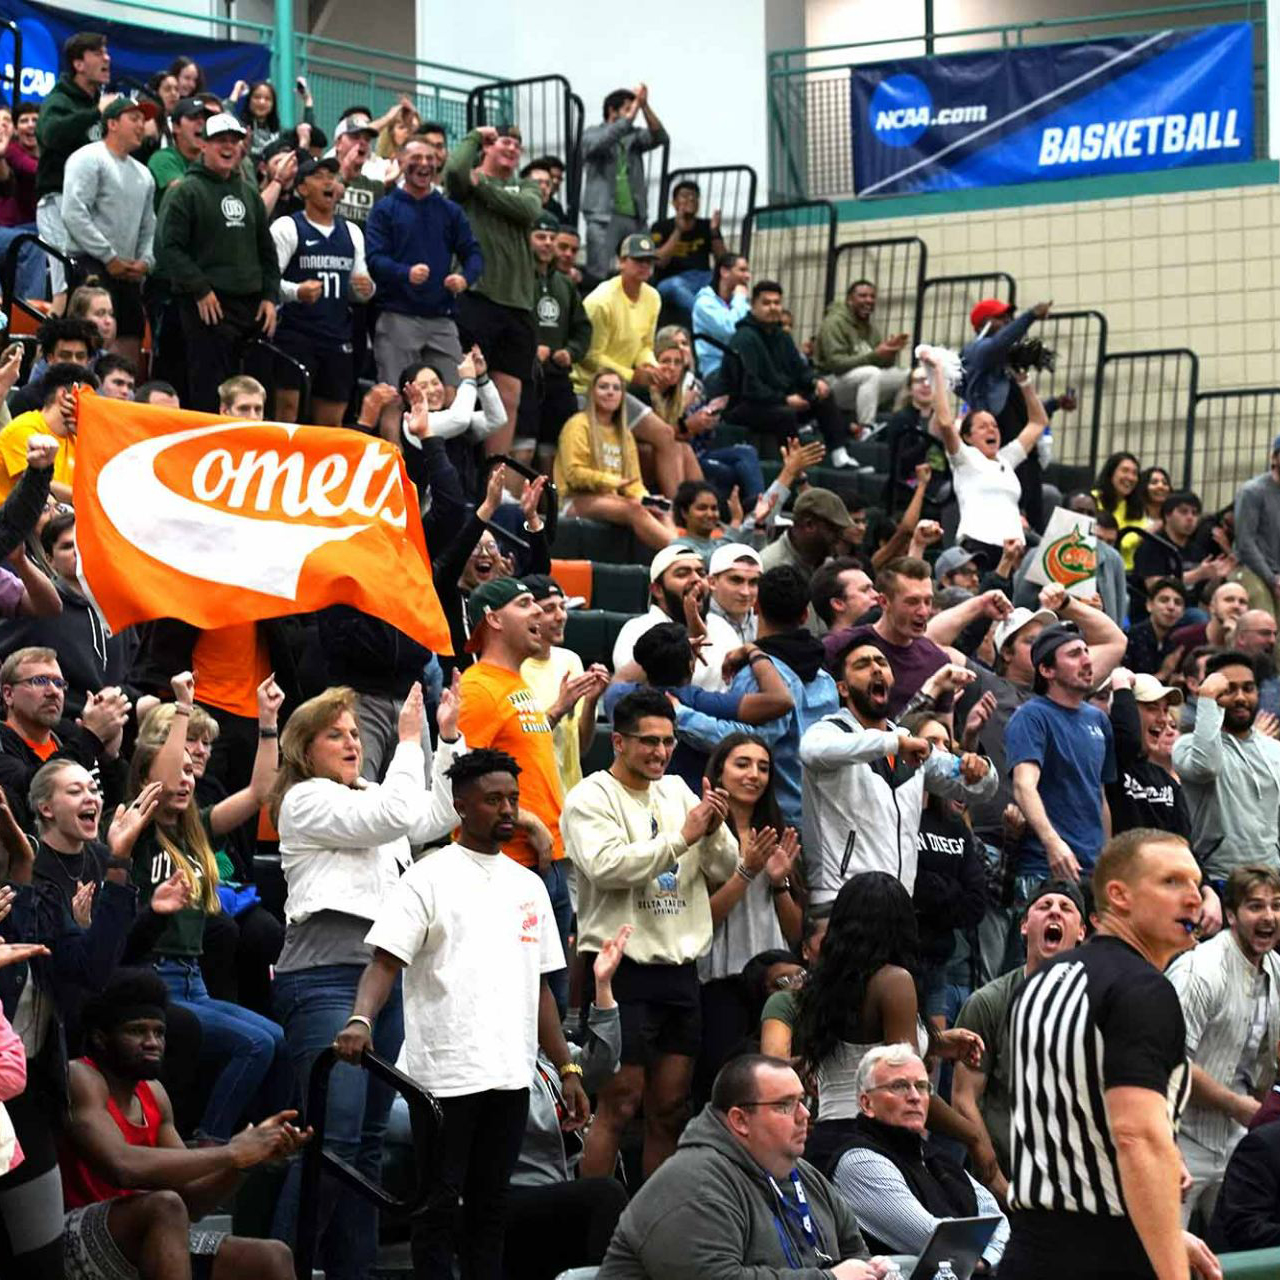 UTD To Begin NCAA Division II Move, Join Lone Star Conference. Group of spectators watching a basketball game.